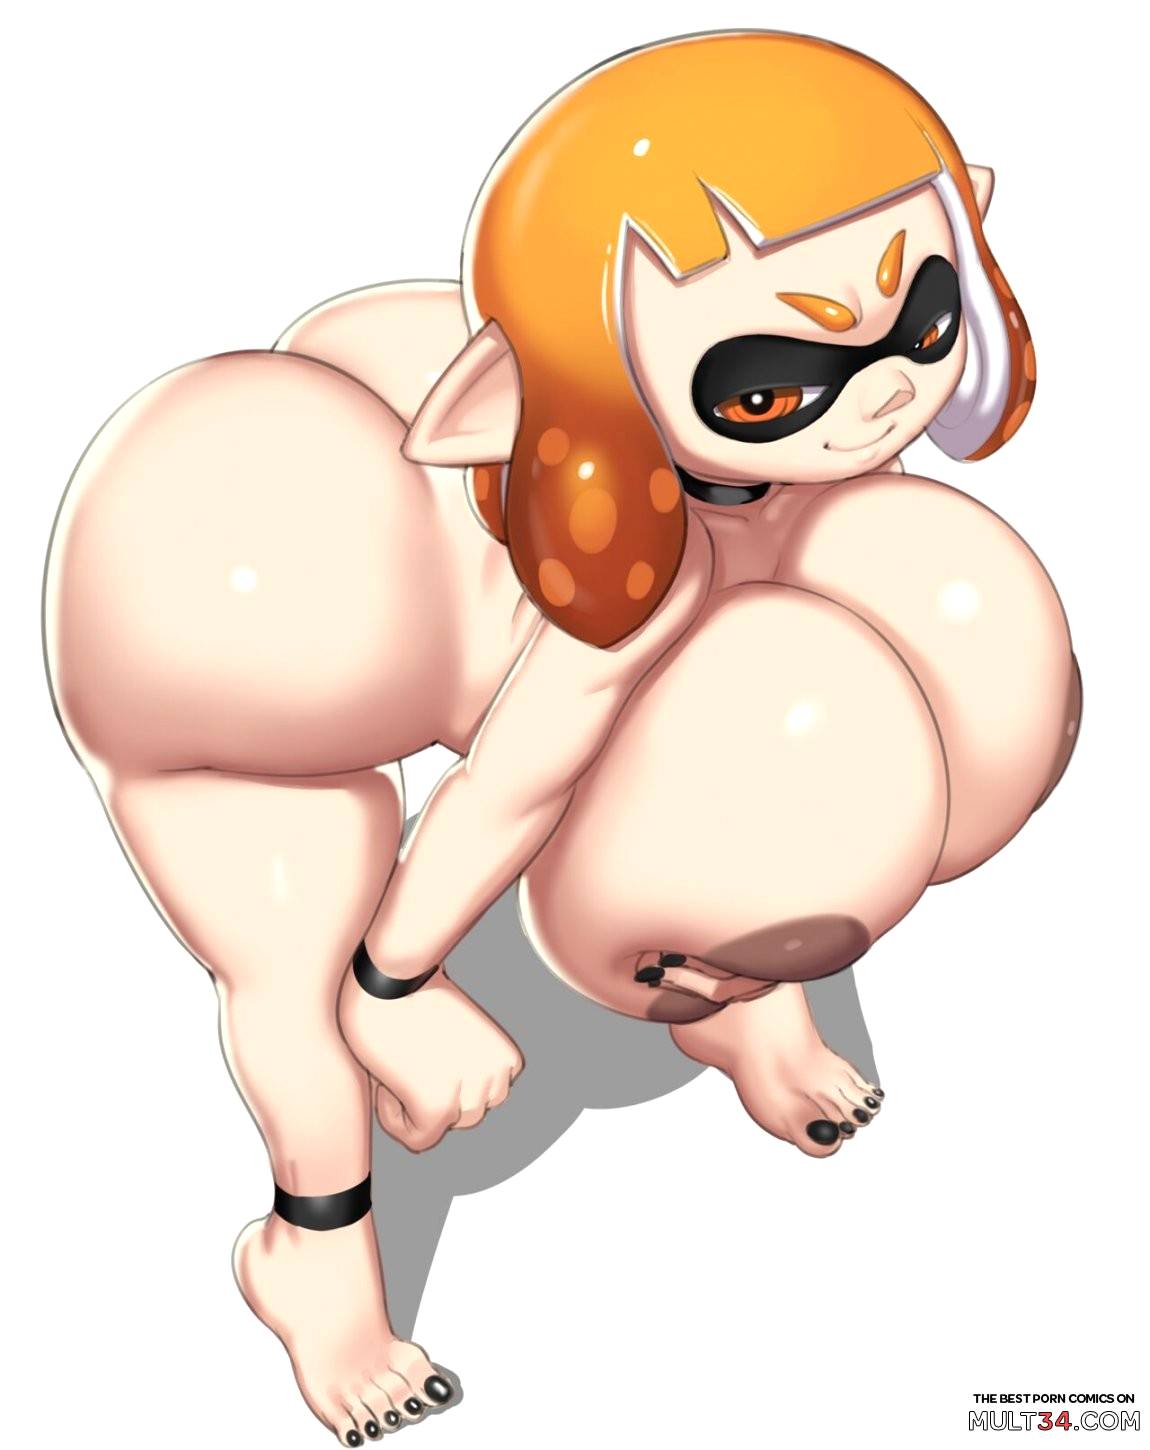 Charlie the Big Titty Inkling Slut page 2